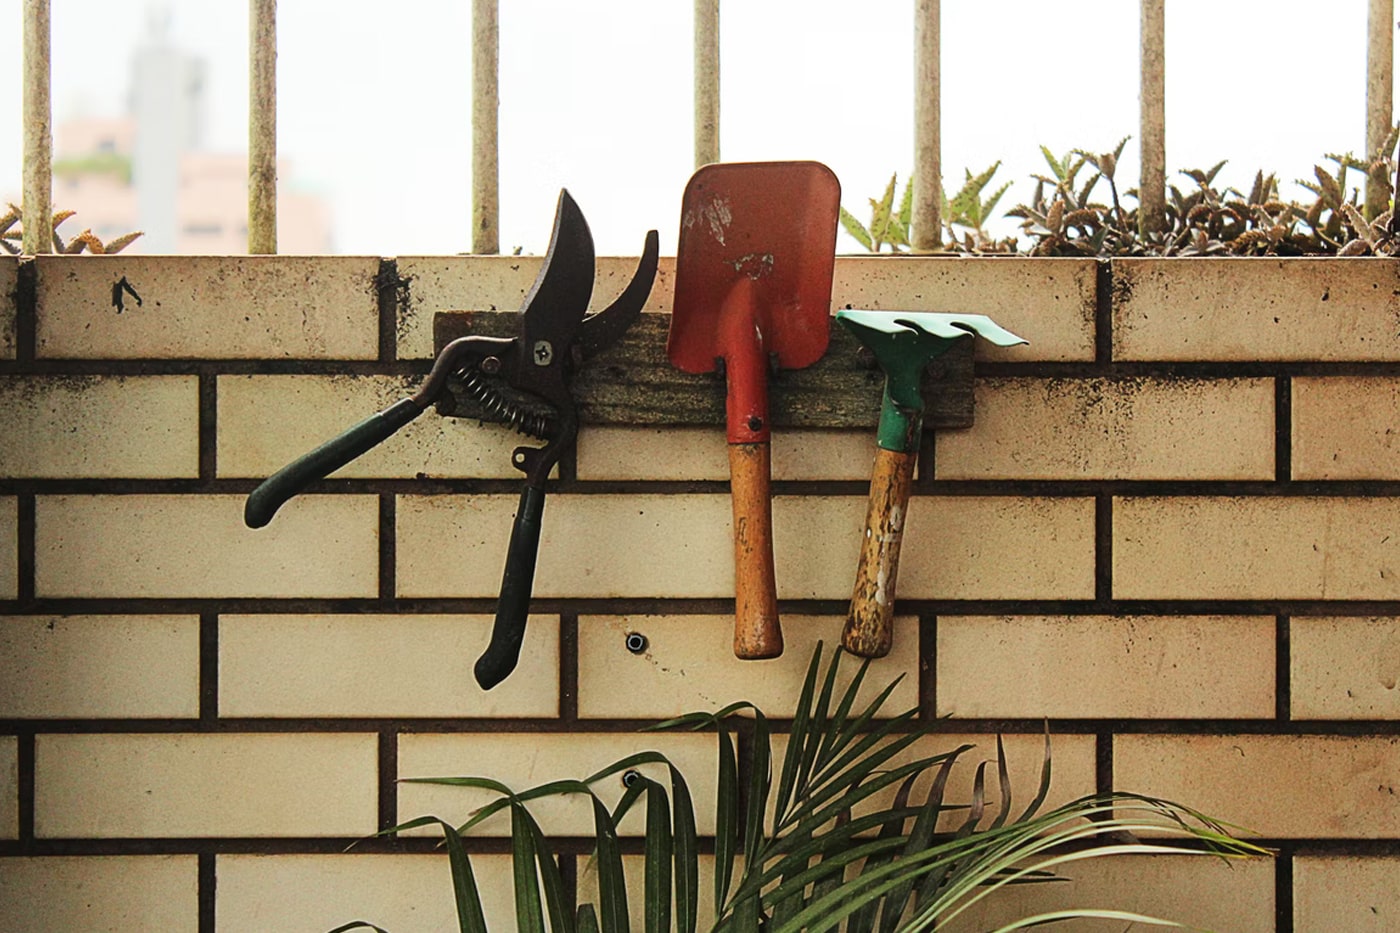 How To Care for Garden Tools